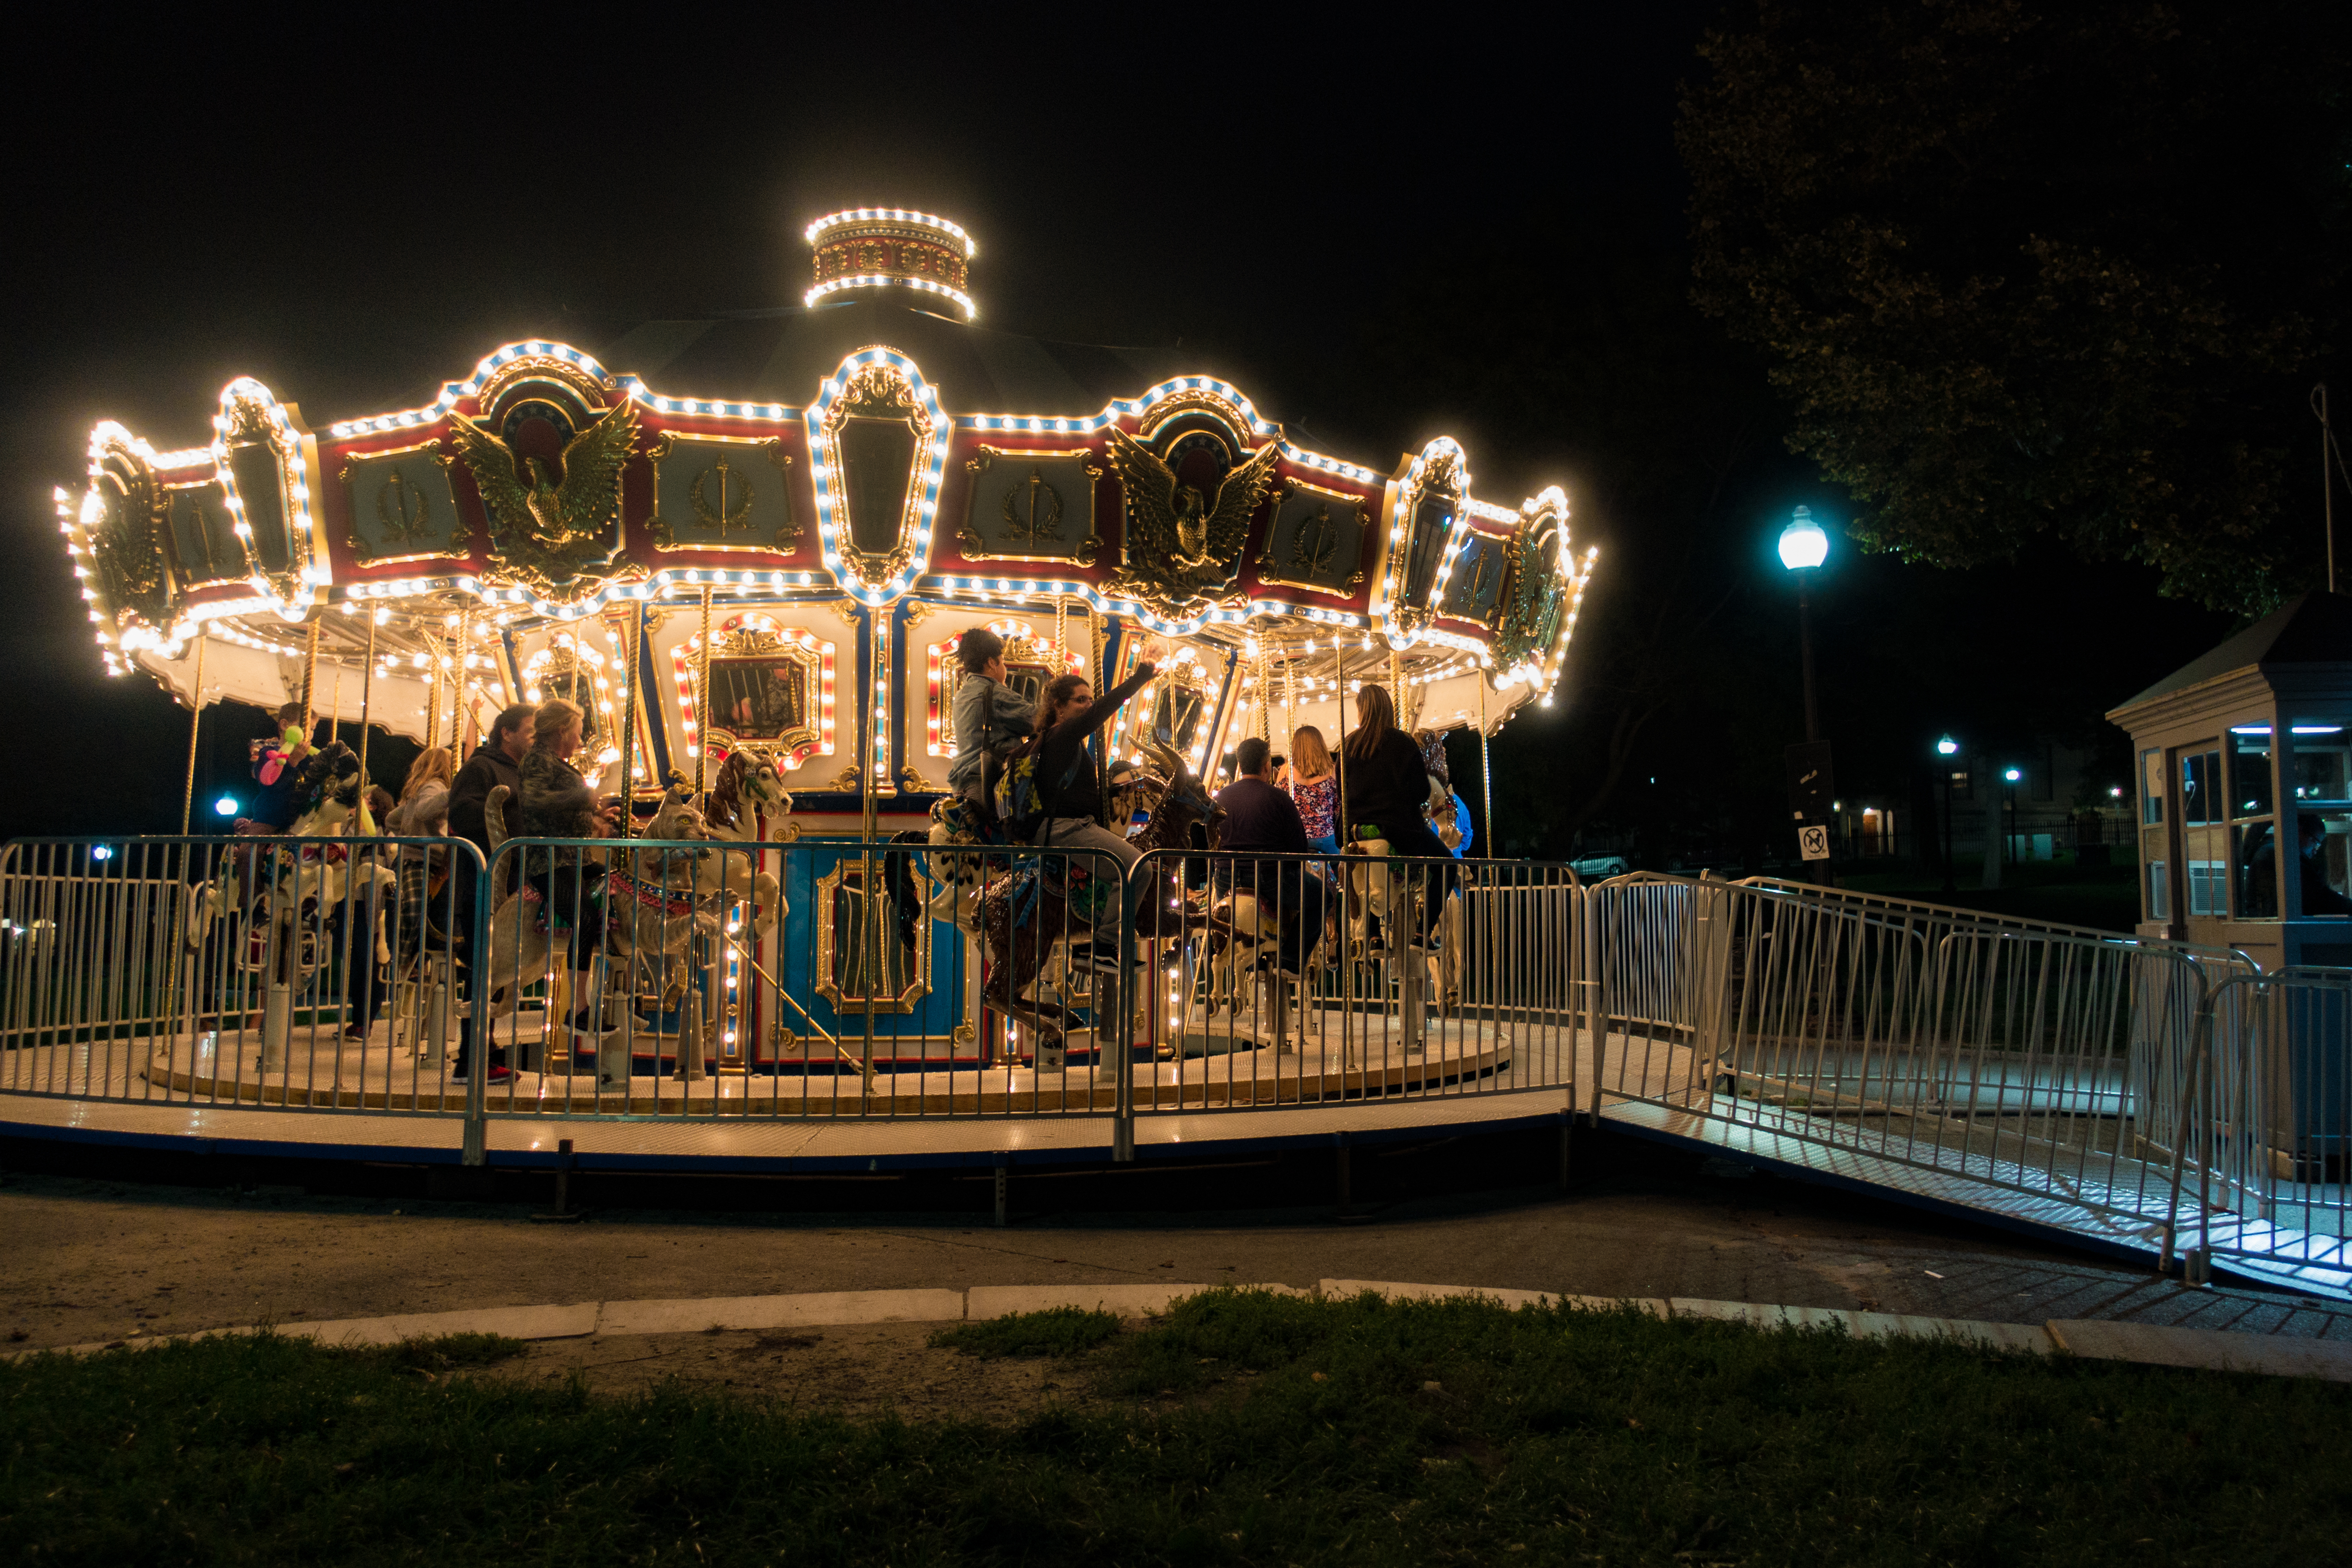 A Carousel on a dark night in Boston Common during a long weekend in Boston